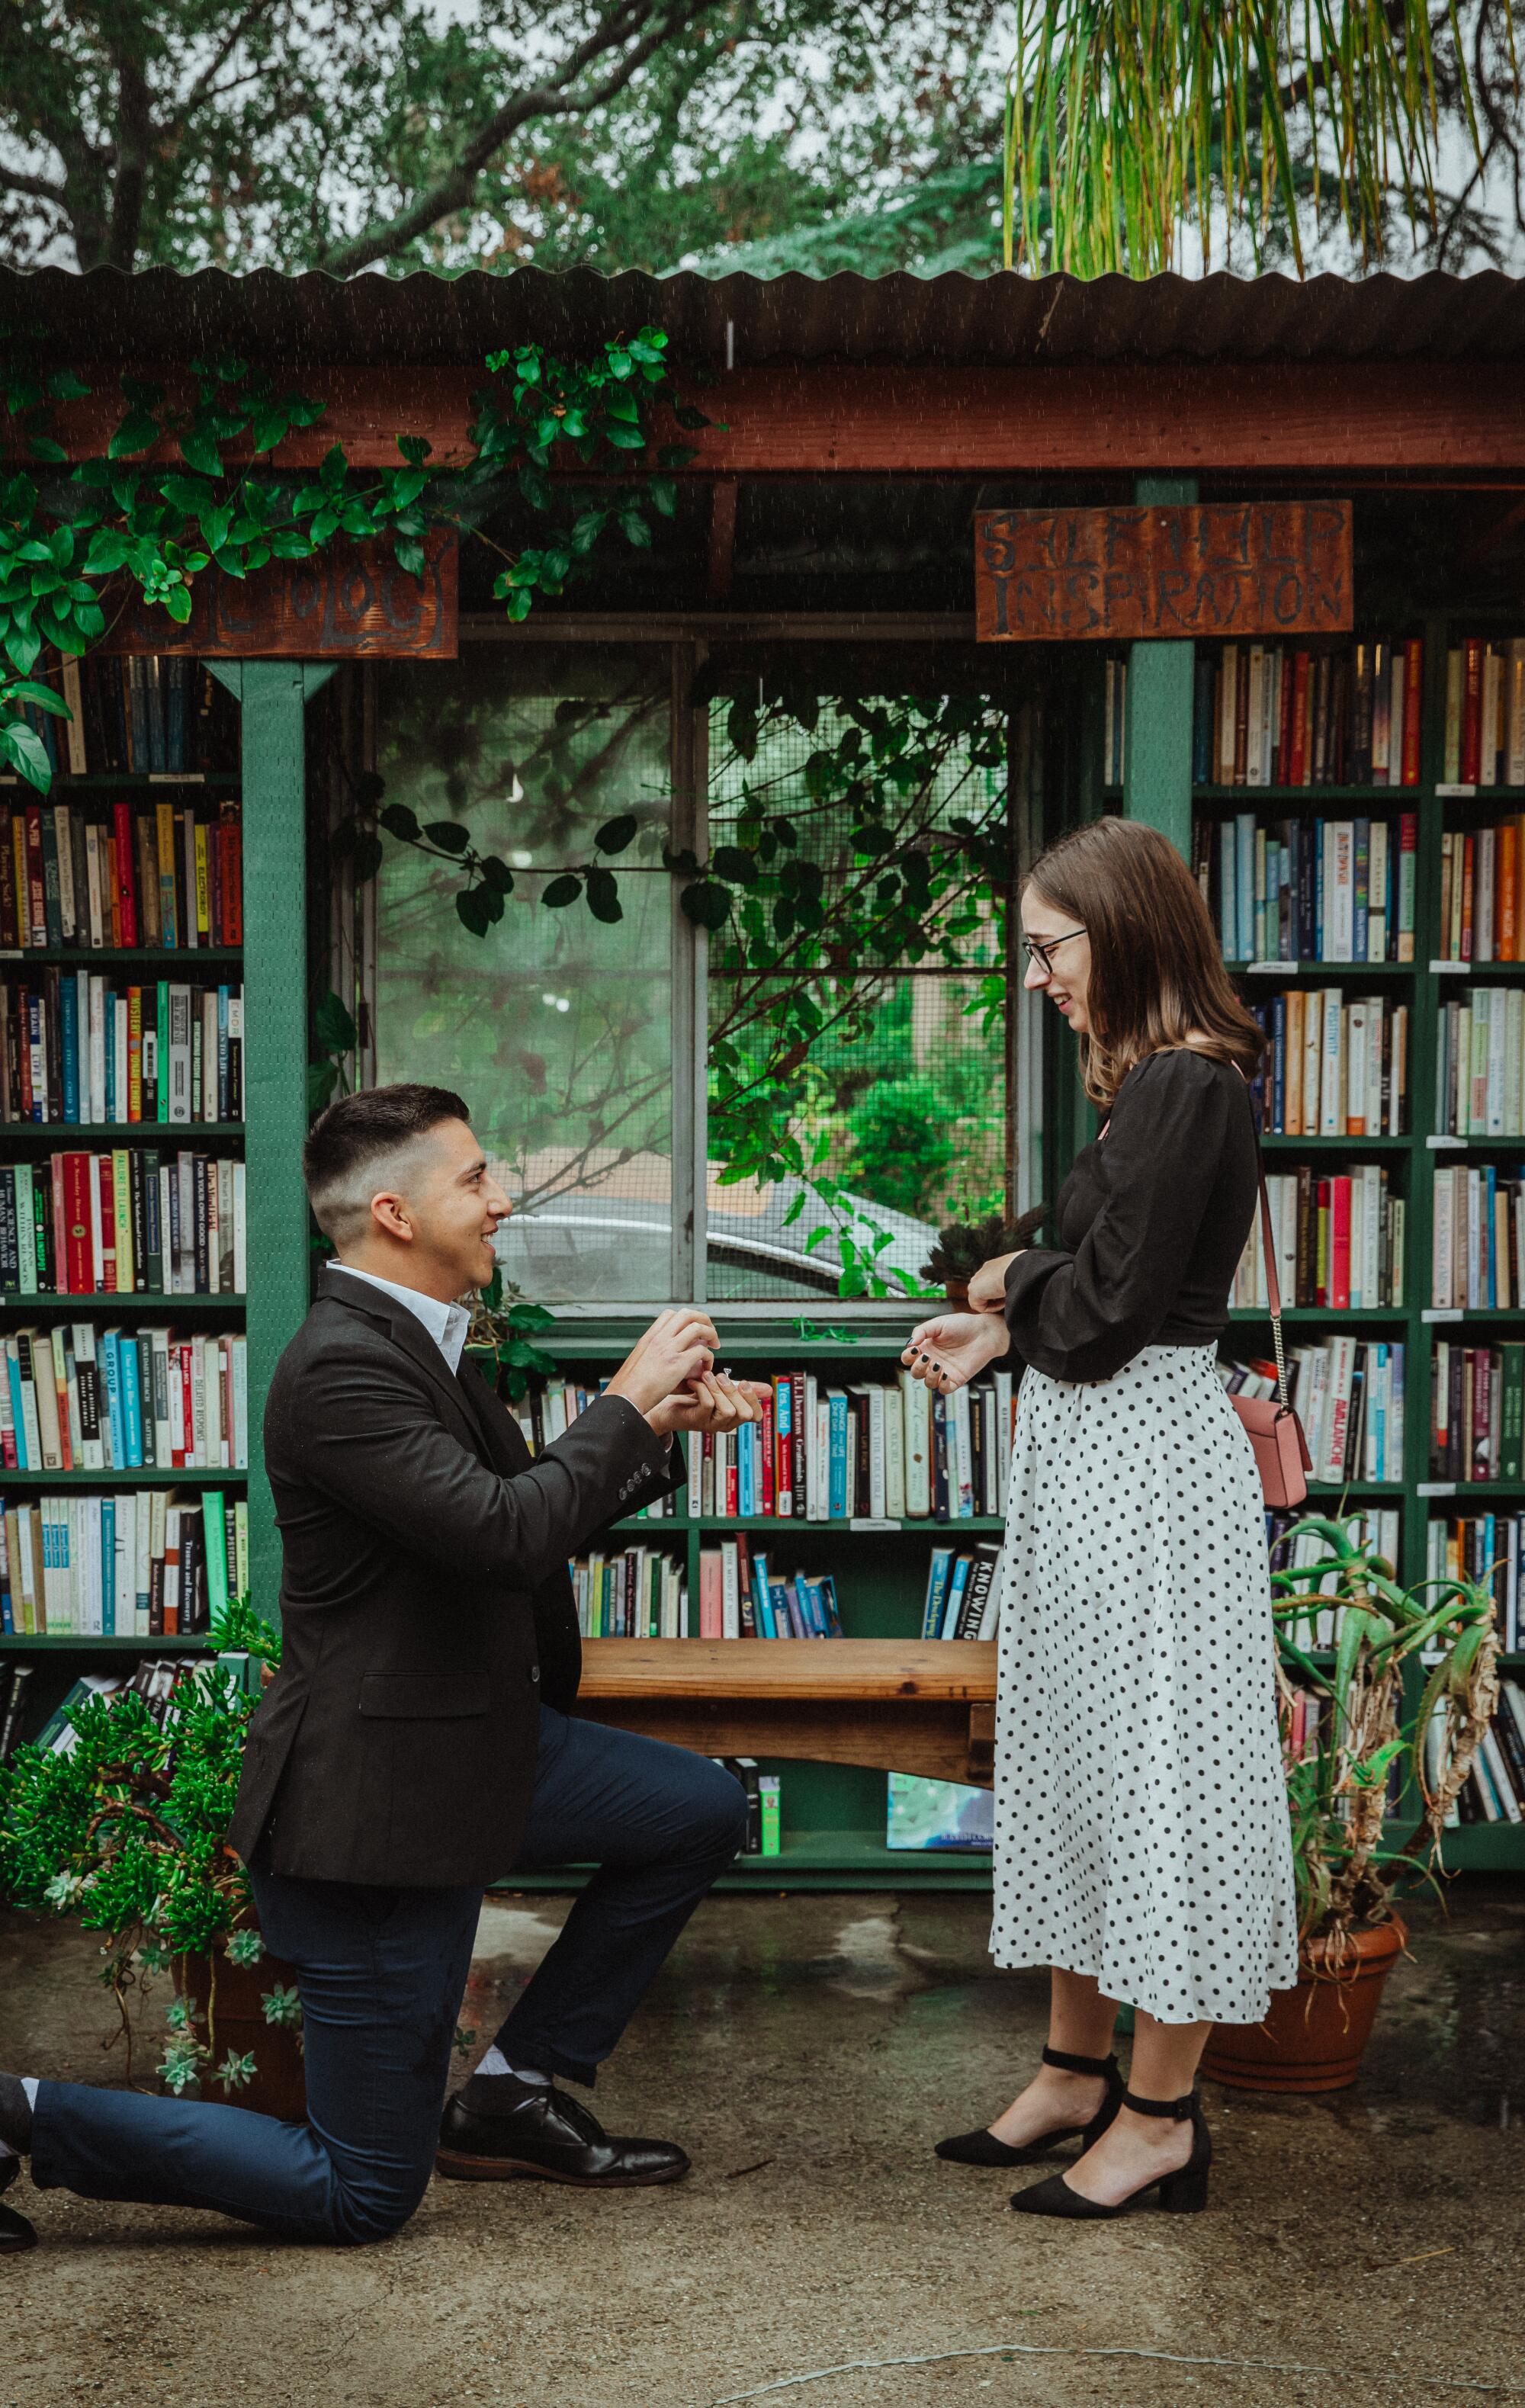 A man on one knee, holding a ring box, proposing to a woman in front of bookshelves at Bart's Books.